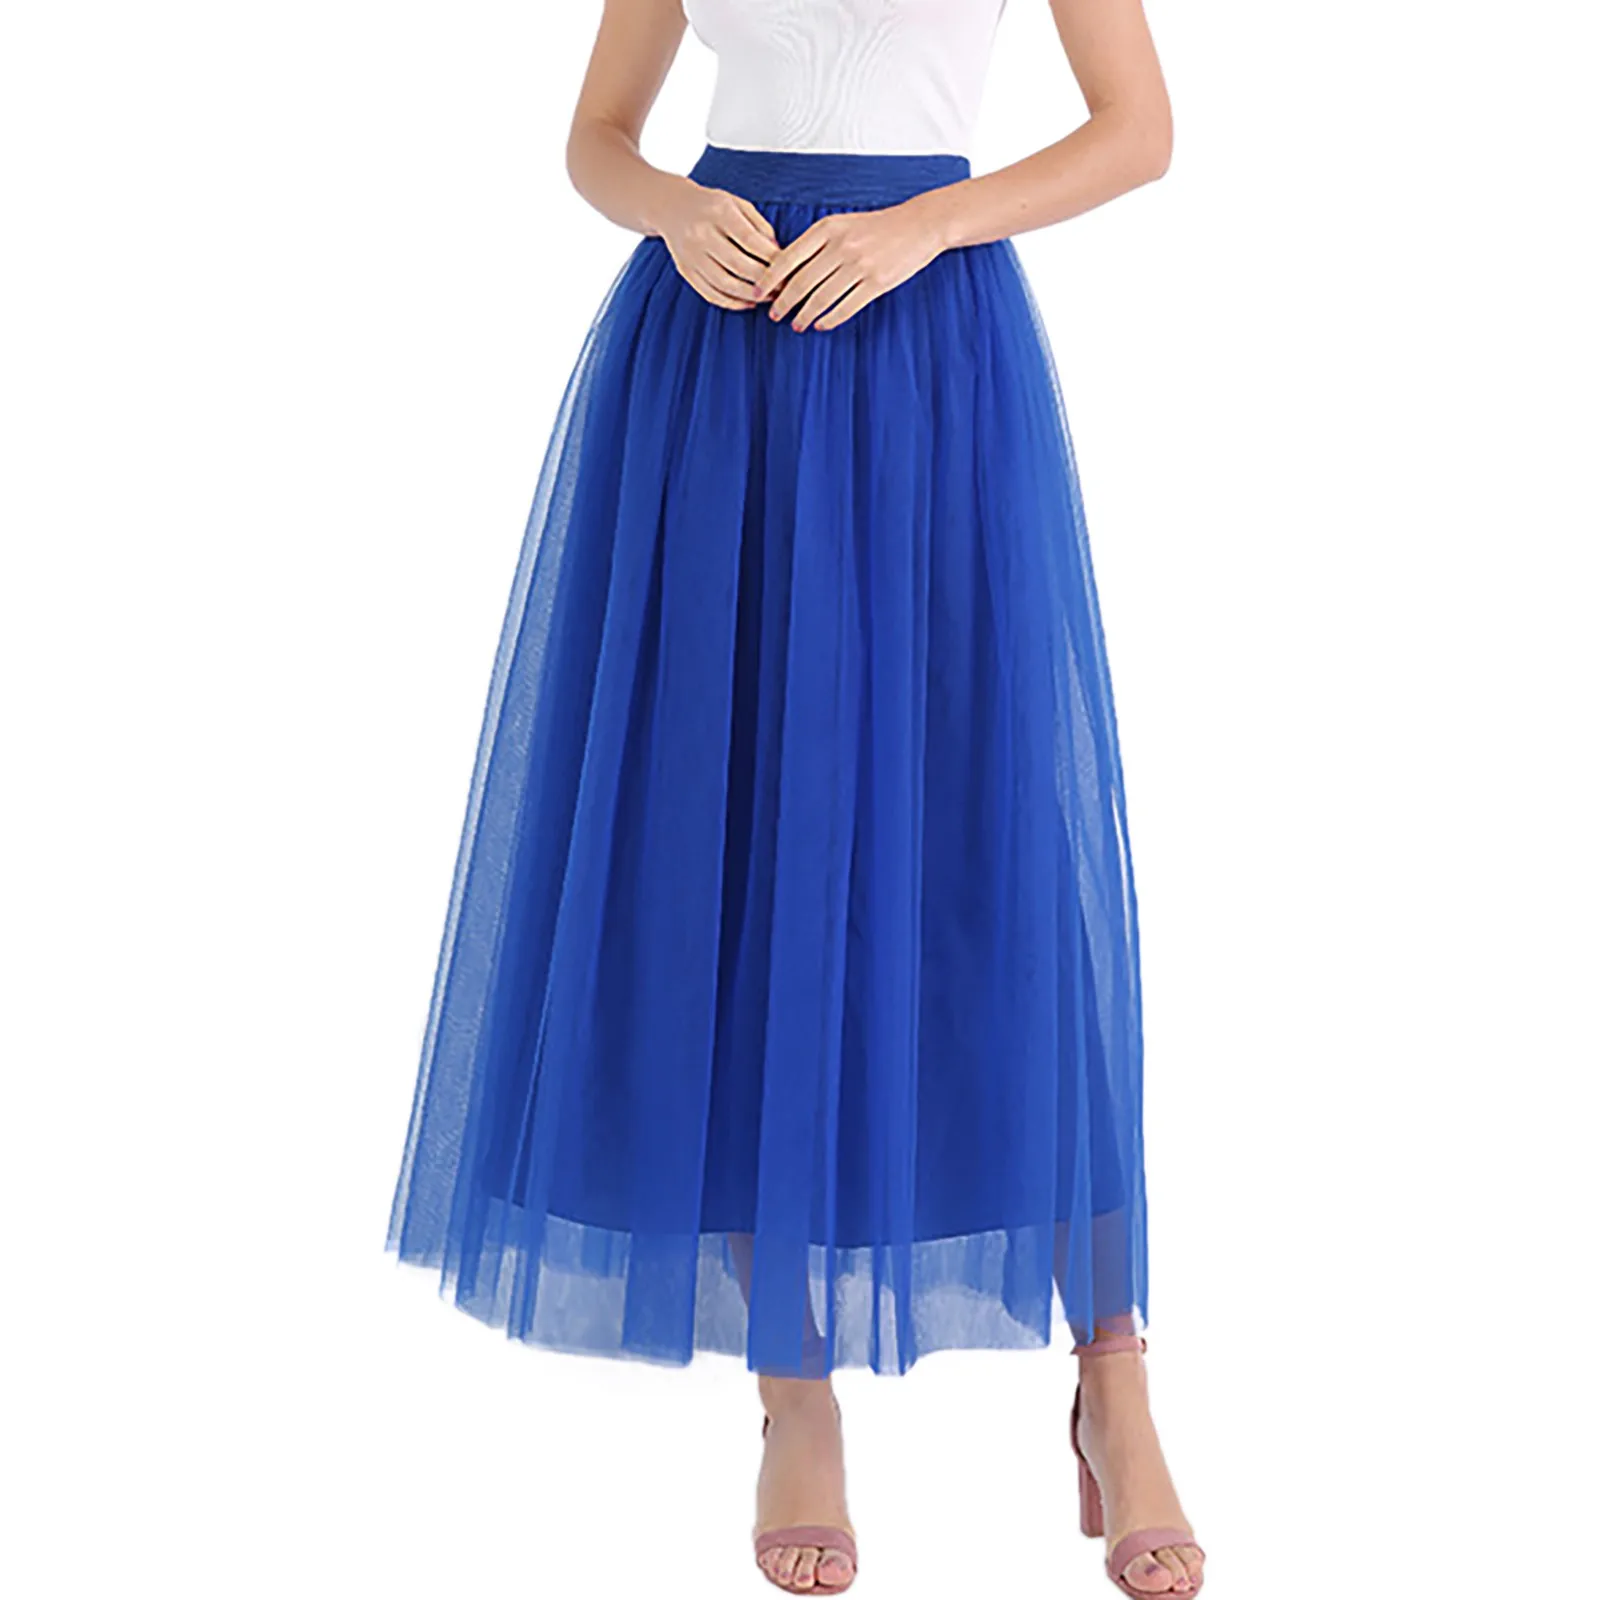 

Tiered Layered Mesh Ballet Prom Party Tulle Tutu A Line Mini Skirt Mid Length Pleated High Waisted And Appear Thin Gauze Skirt